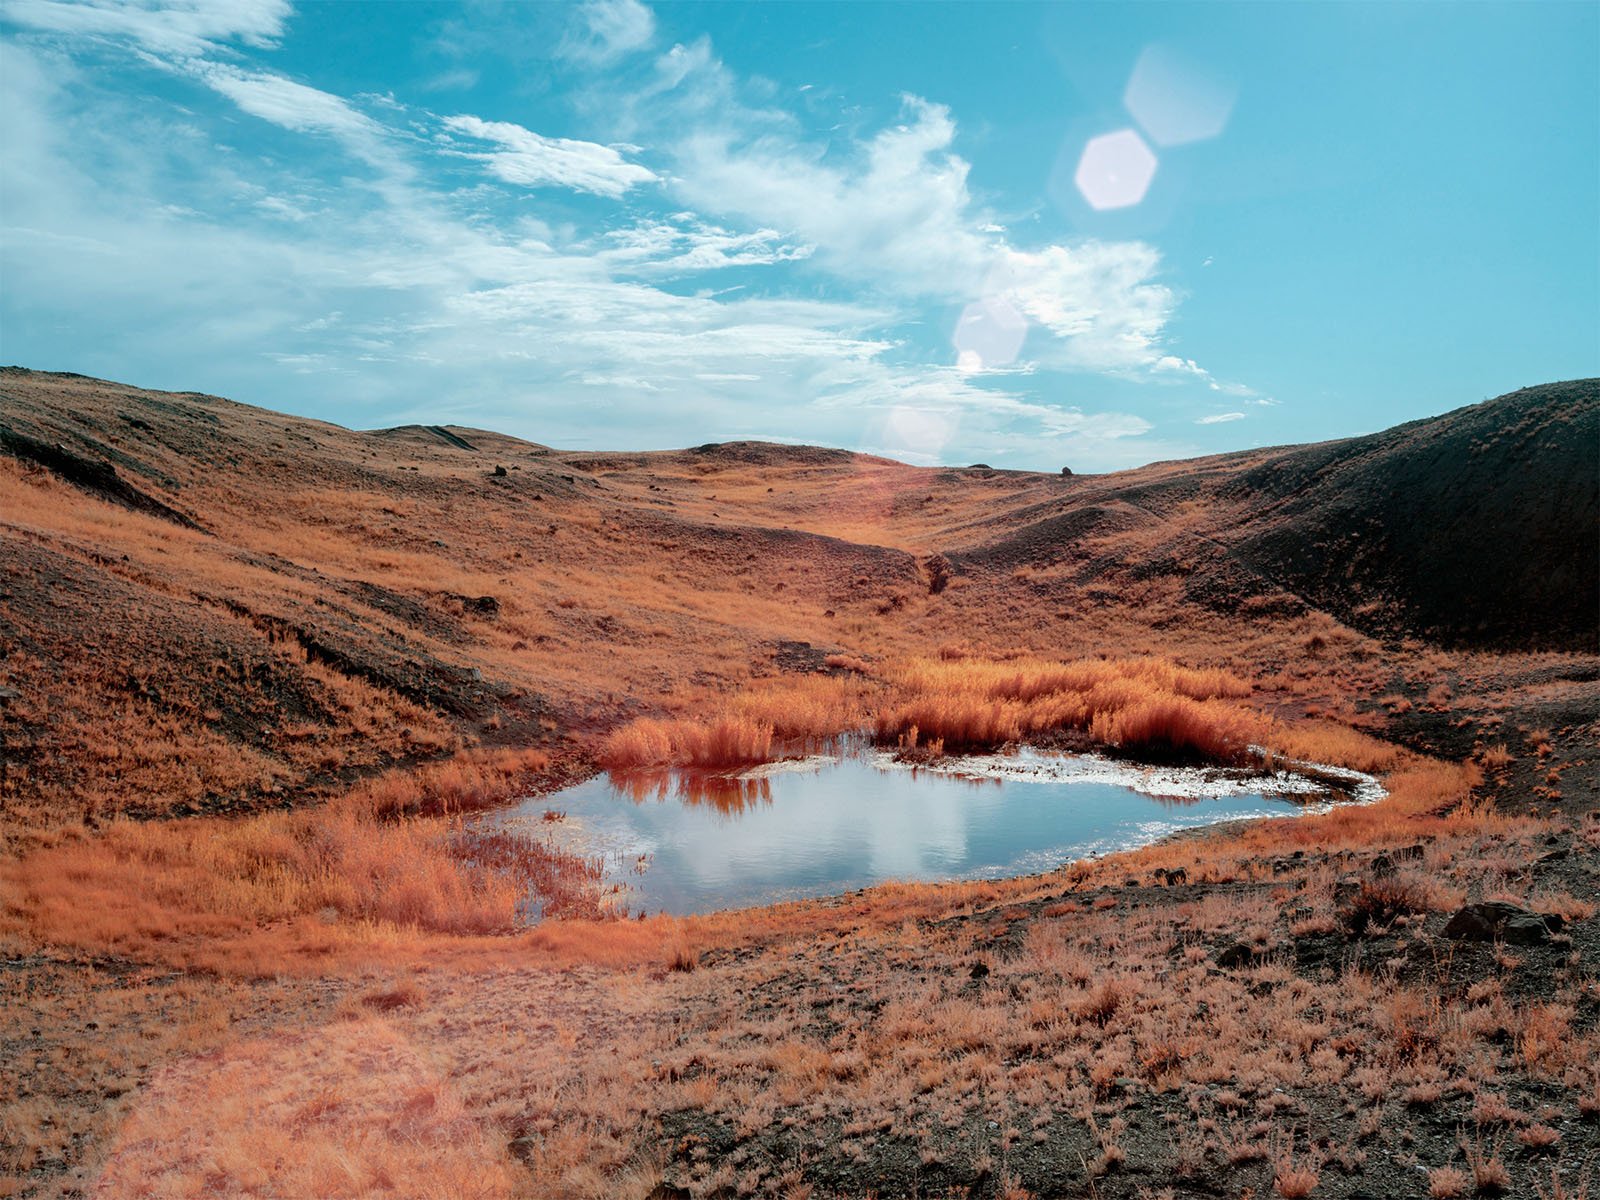 A serene landscape featuring a small pond surrounded by rolling hills covered in vibrant orange grass under a bright blue sky with sun flares.